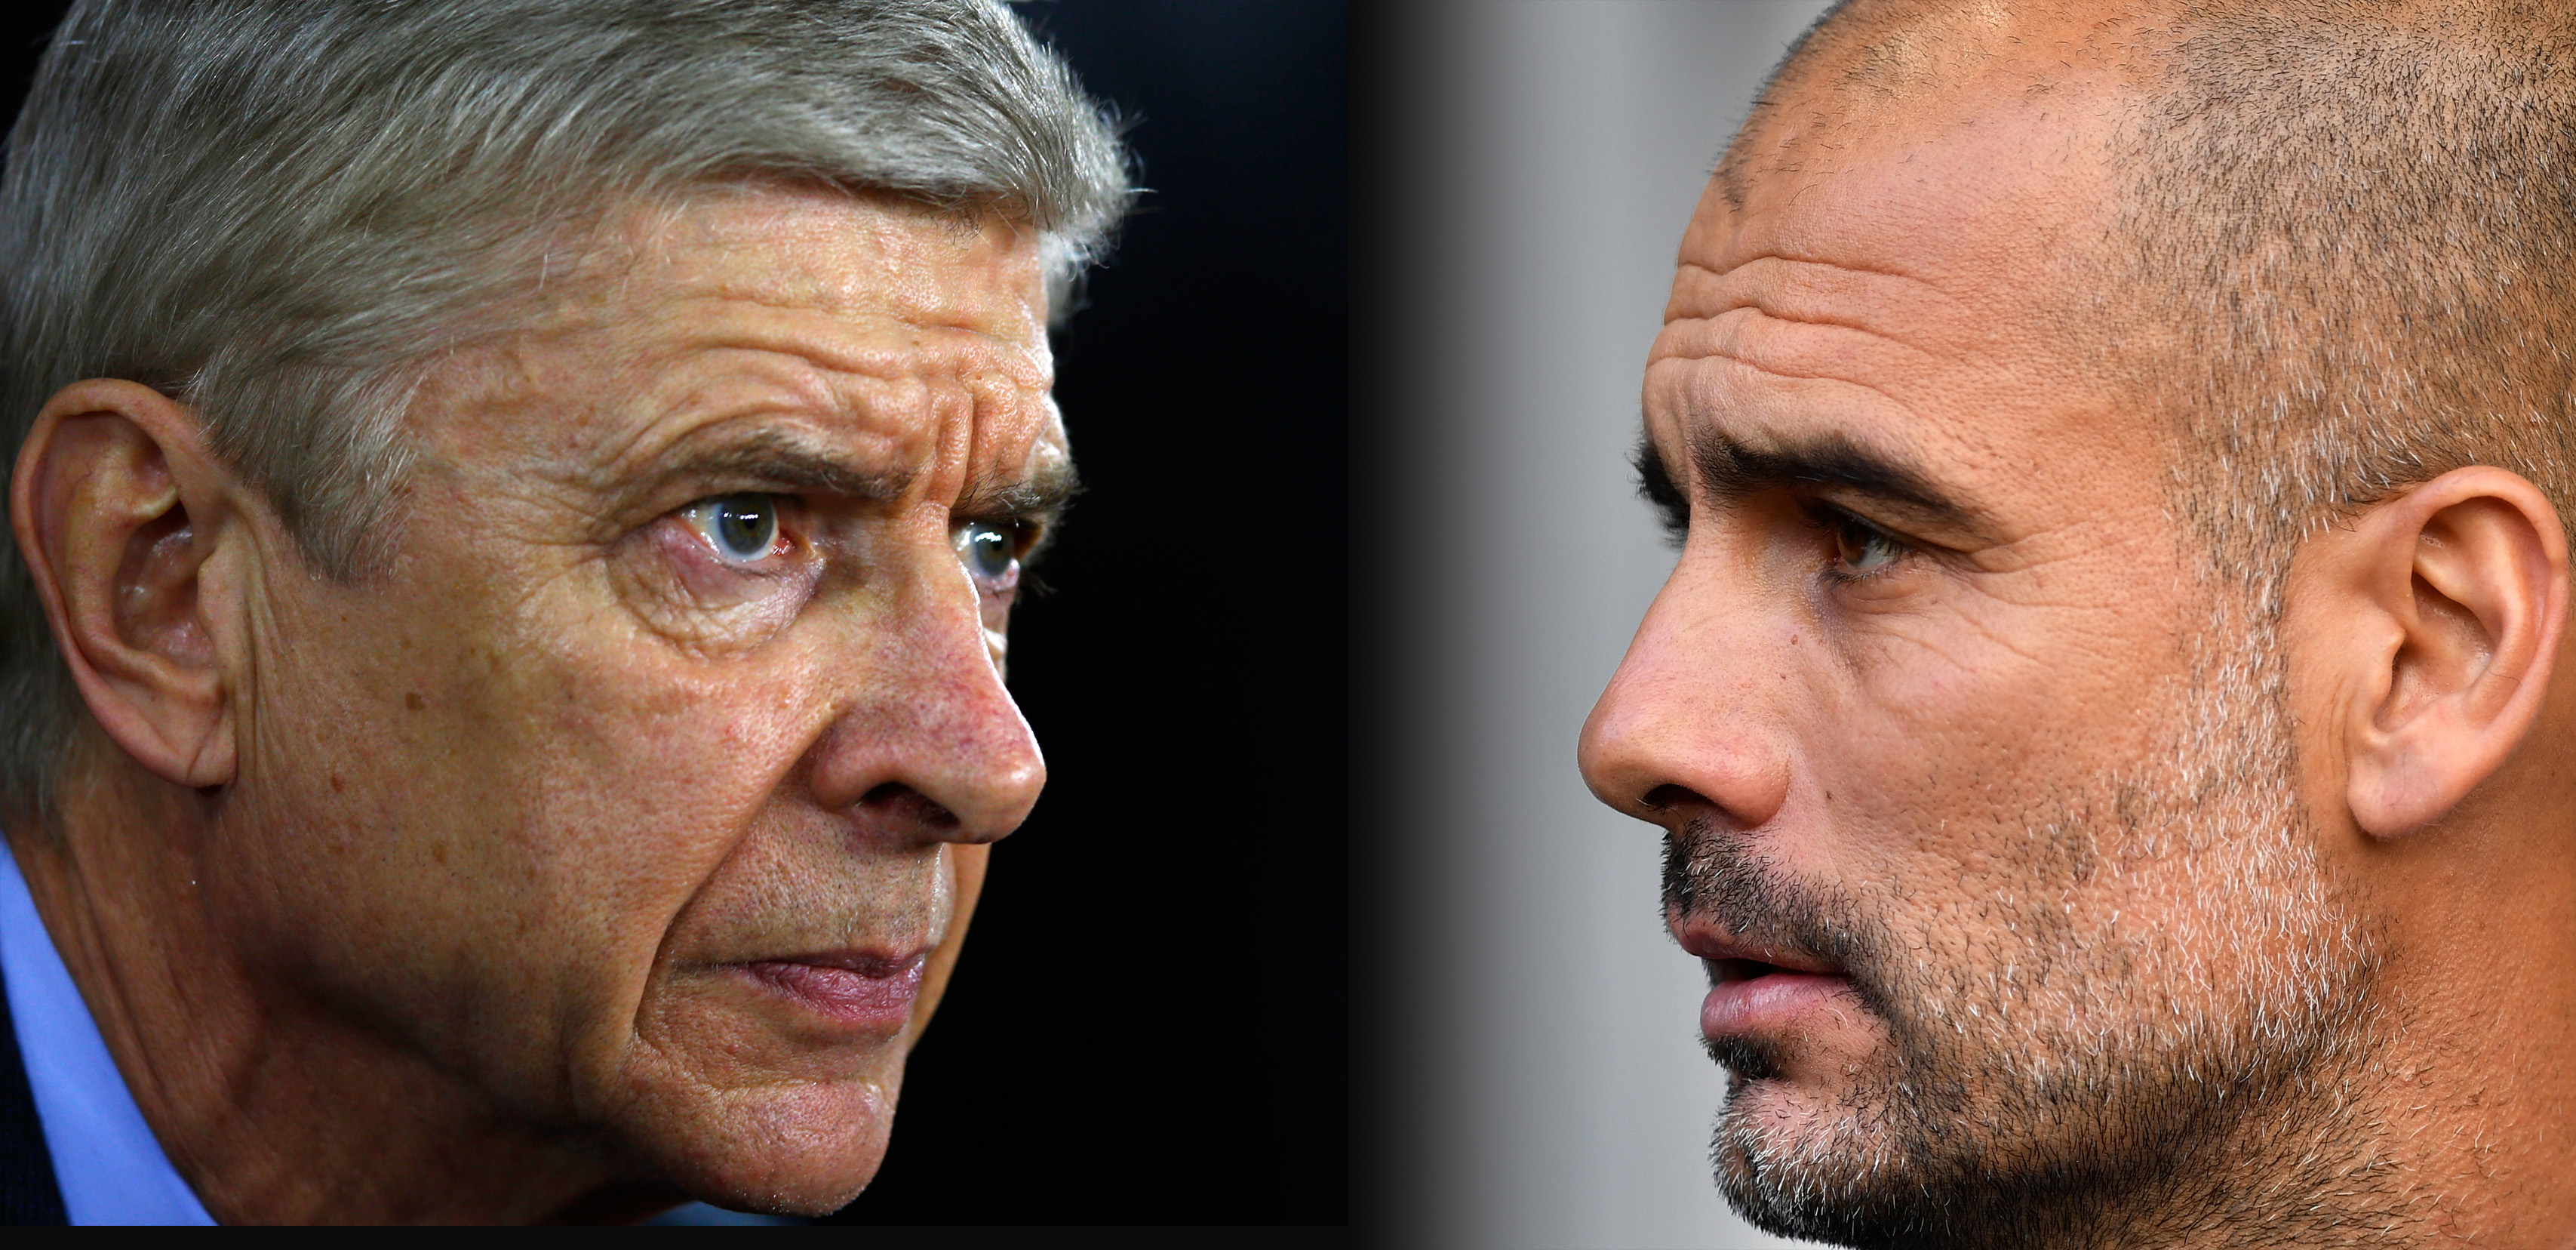 FILE PHOTO (EDITORS NOTE: GRADIENT ADDED - COMPOSITE OF TWO IMAGES - Image numbers (L) 502540908 and 612040098) In this composite image a comparision has been made between Arsene Wenger, Manager of Arsenal and Josep Guardiola, Manager of Manchester City. Arsenal and  Manchester City meet in a Premier League match on April 2, 2017 at the Emirates Stadium in London. ***LEFT IMAGE*** SOUTHAMPTON, ENGLAND - DECEMBER 26: Arsene Wenger manager of Arsenal during the Barclays Premier League match between Southampton and Arsenal at St Mary's Stadium on December 26, 2015 in Southampton, England. (Photo by Christopher Lee/Getty Images) ***RIGHT IMAGE*** LONDON, ENGLAND - OCTOBER 02: Josep Guardiola, Manager of Manchester City looks on during the Premier League match between Tottenham Hotspur and Manchester City at White Hart Lane on October 2, 2016 in London, England. (Photo by Dan Mullan/Getty Images)